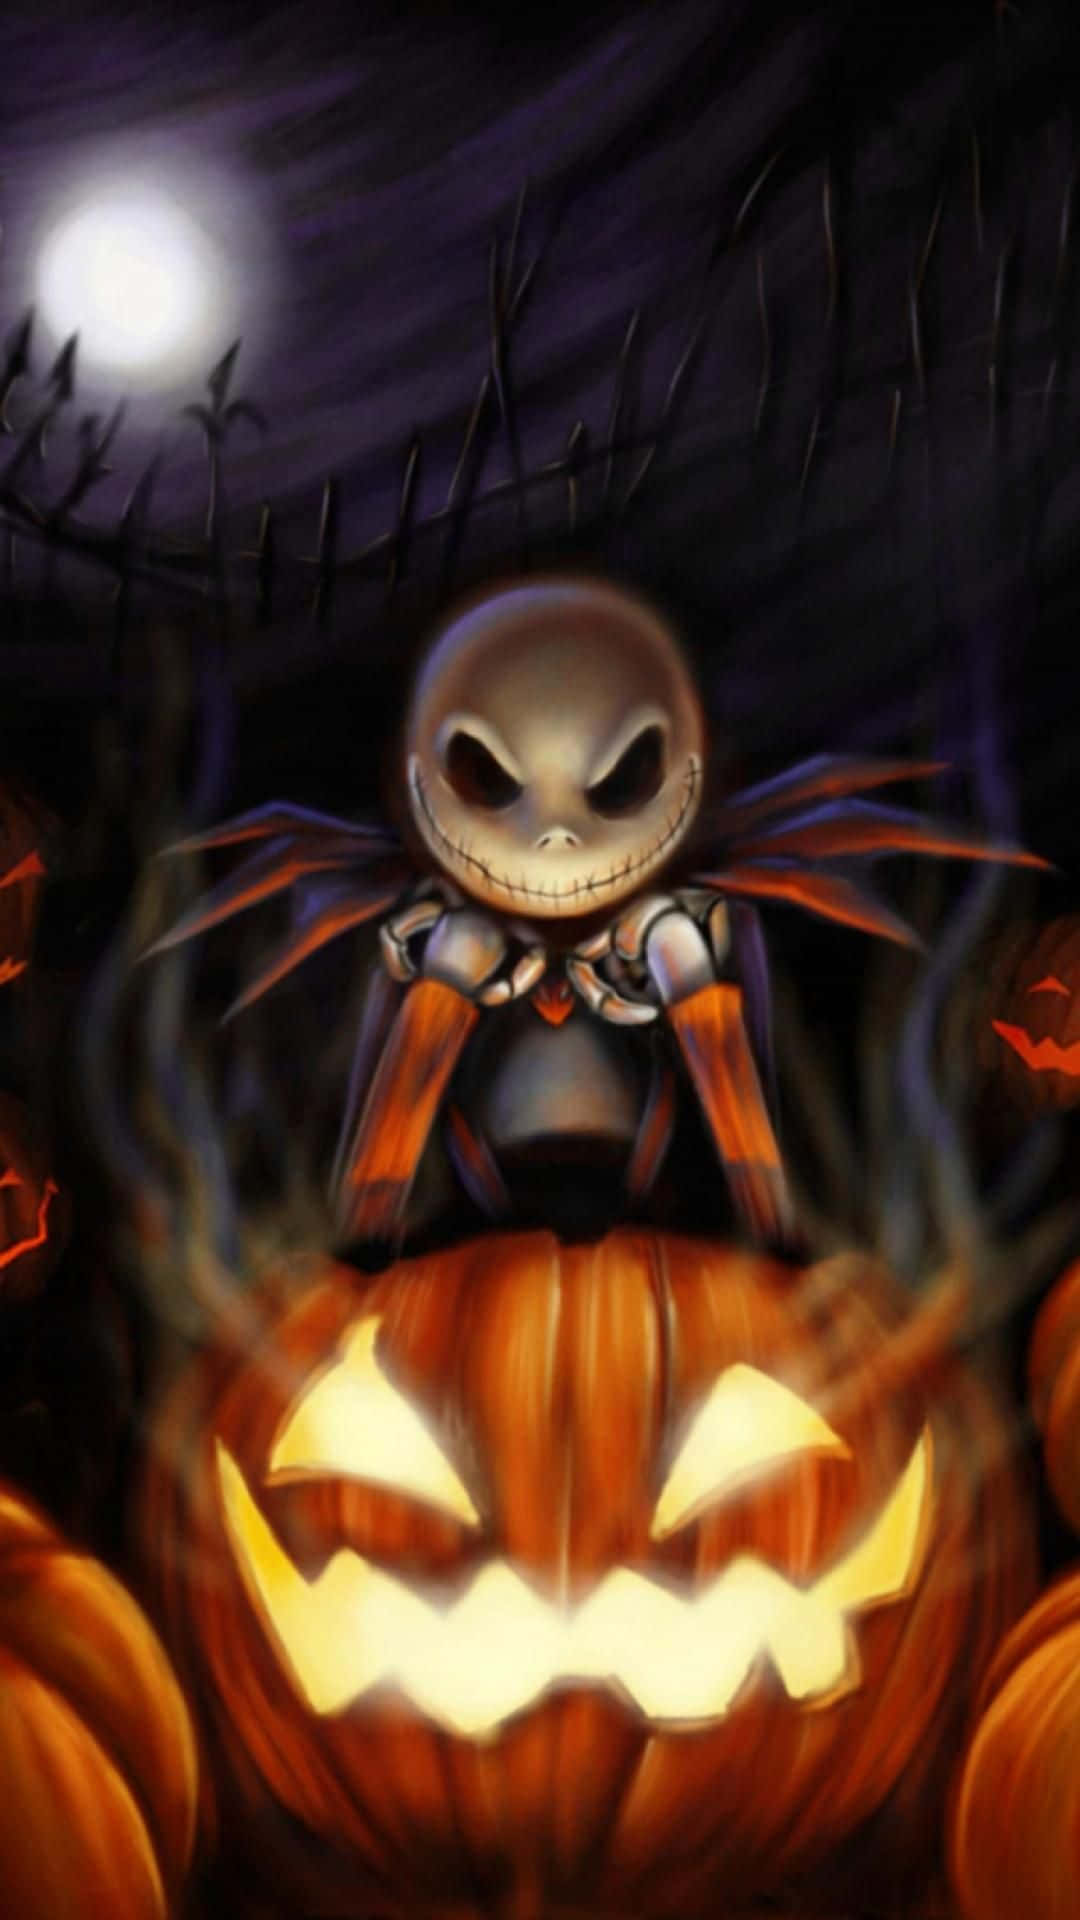 Get festive with the Nightmare Before Christmas Phone! Wallpaper